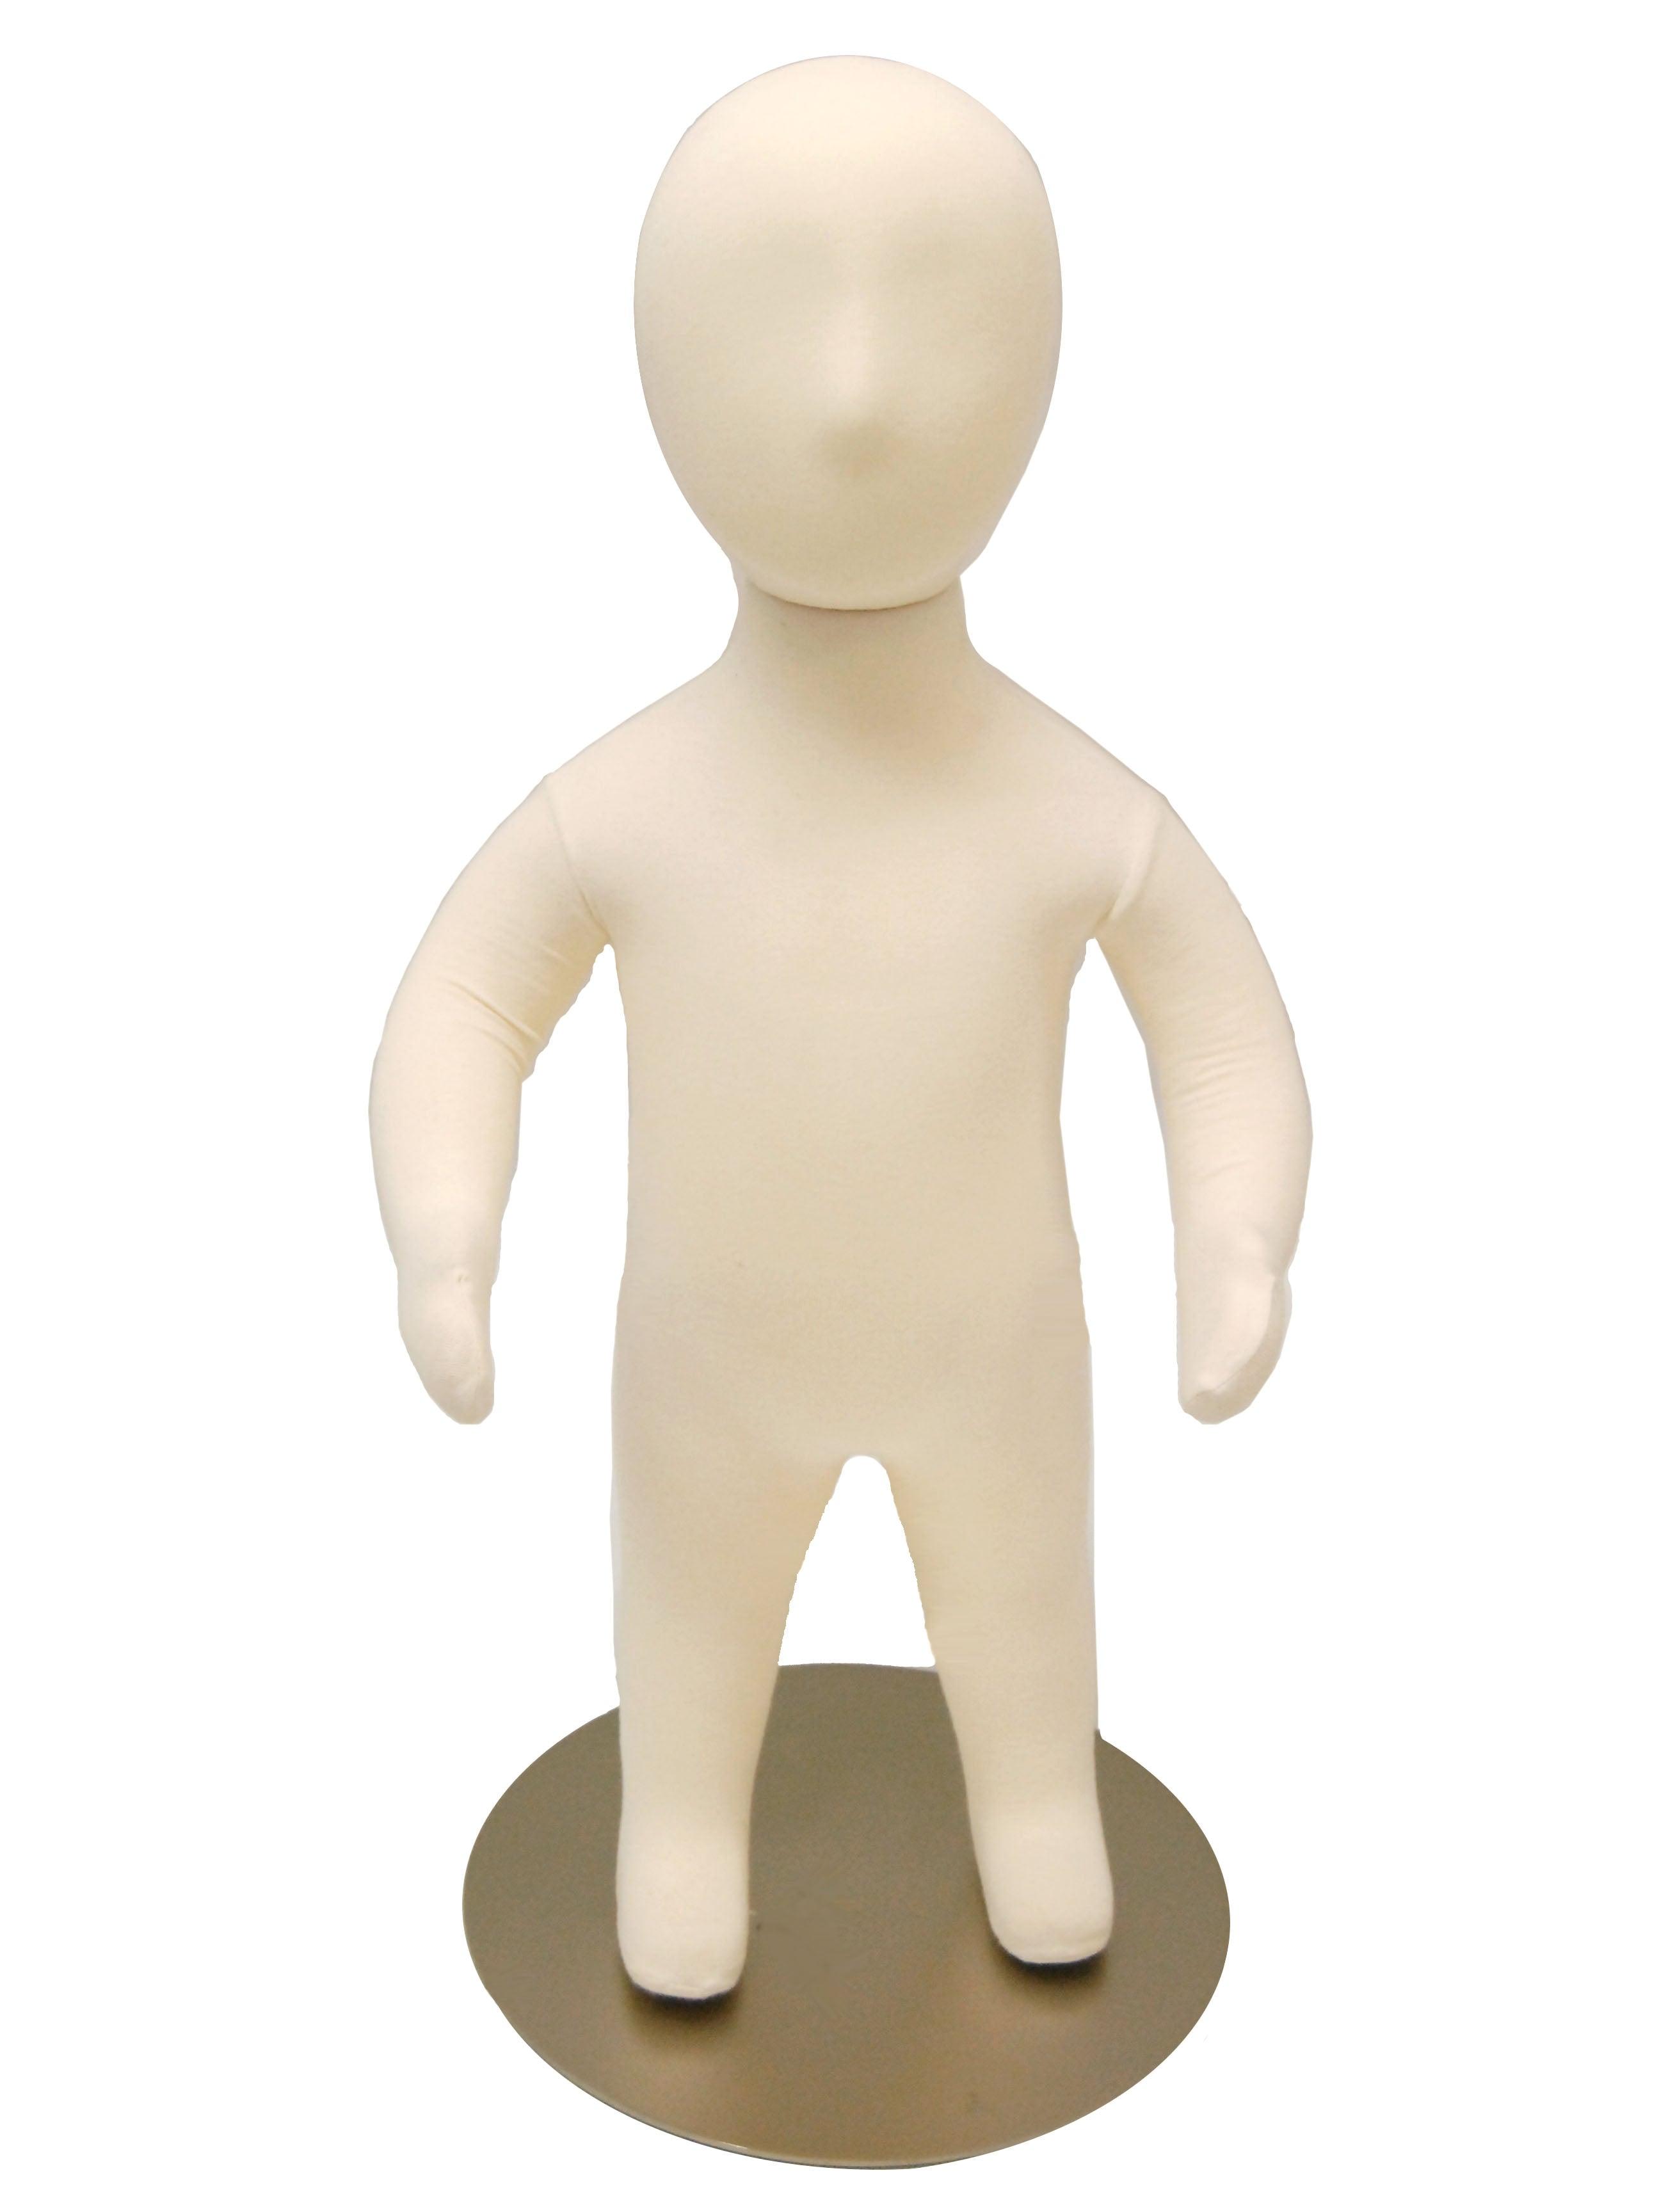 Bendable Child Mannequin with White Fabric